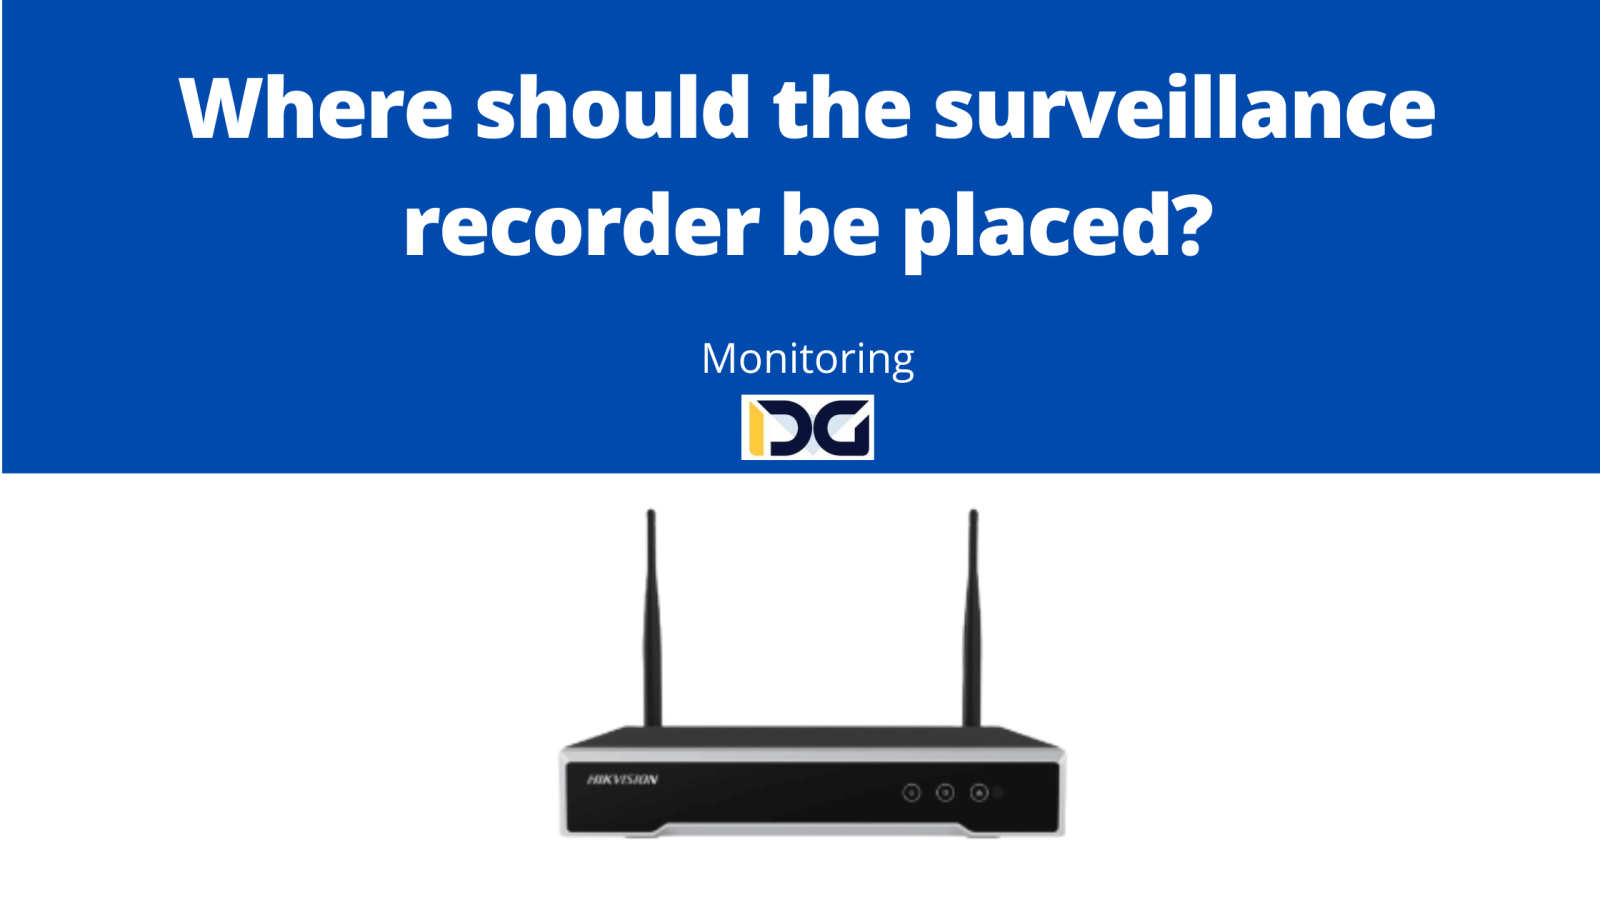 Where should the surveillance recorder be placed?